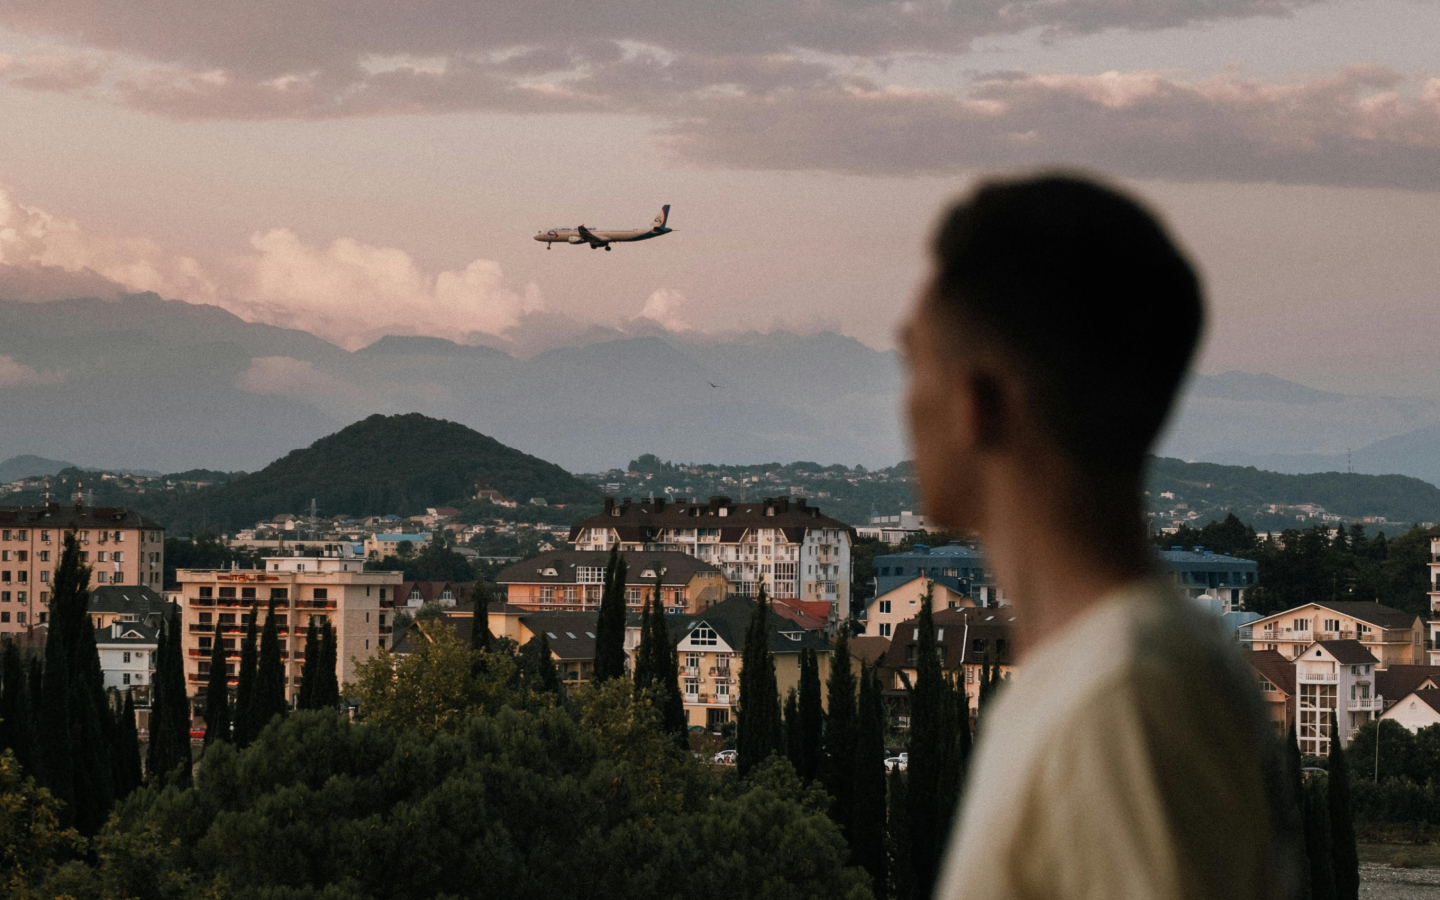 Profile of a young man looking out over a cityscape with residential buildings and greenery, with mountains in the background and an airplane flying in the sky at dusk.